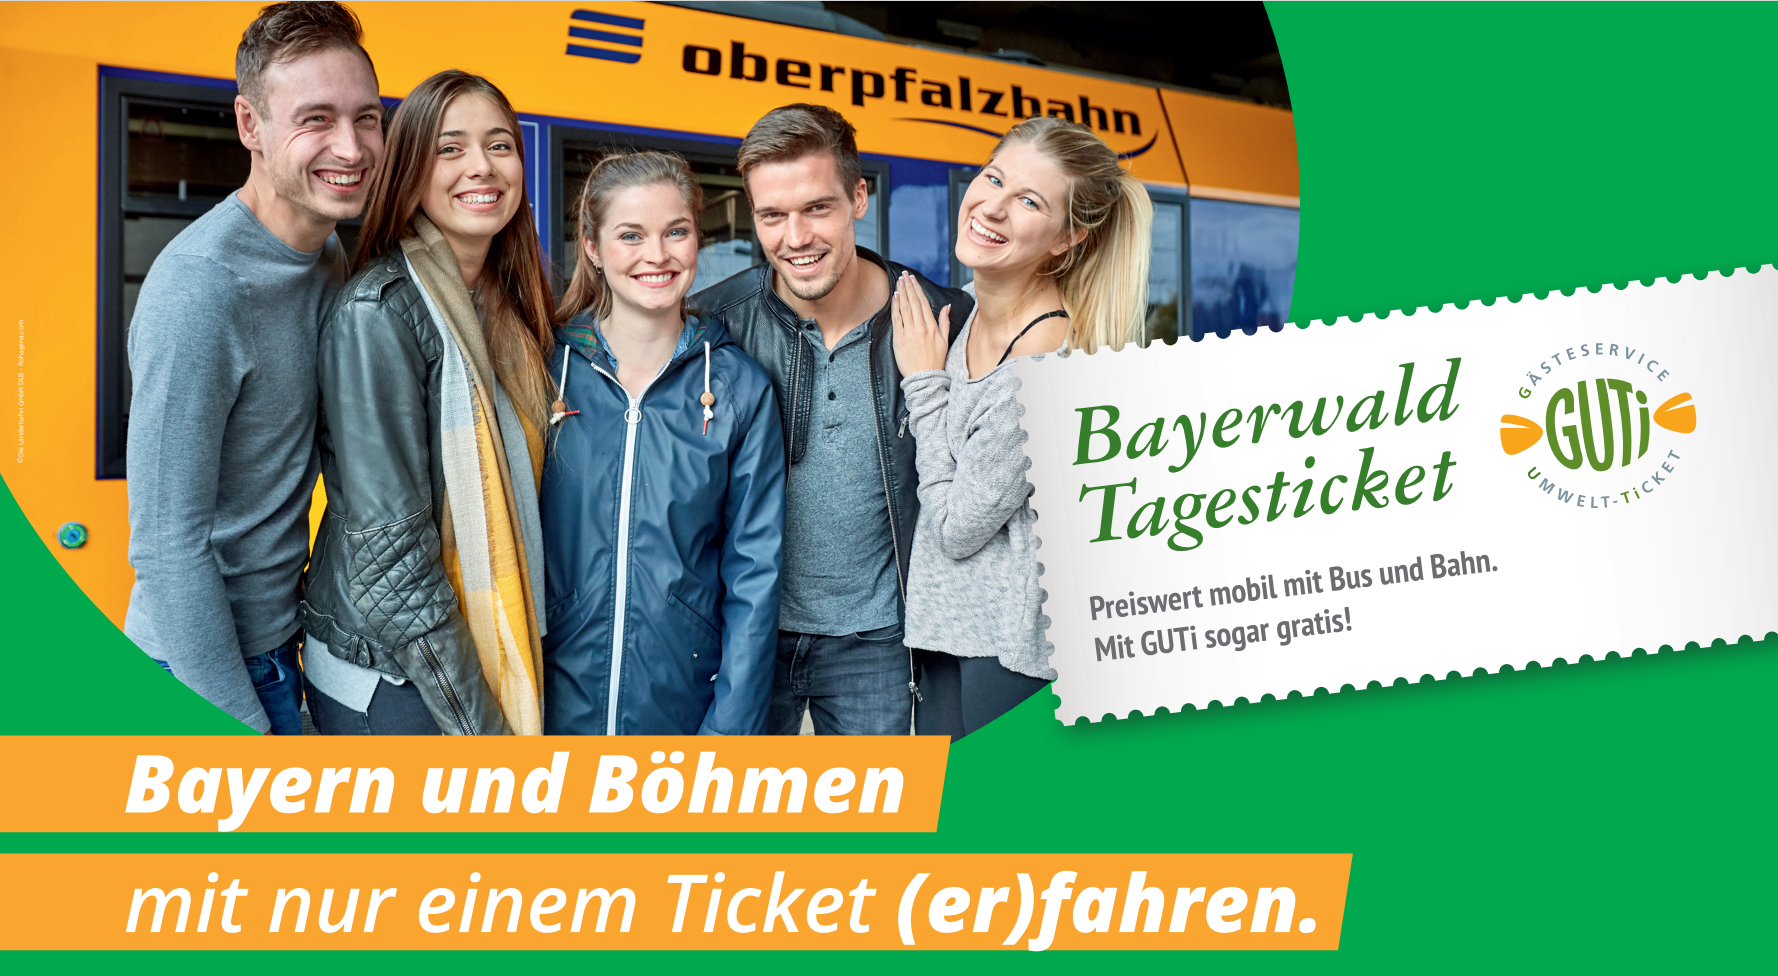 Bayerwald Tagesticket.PNG